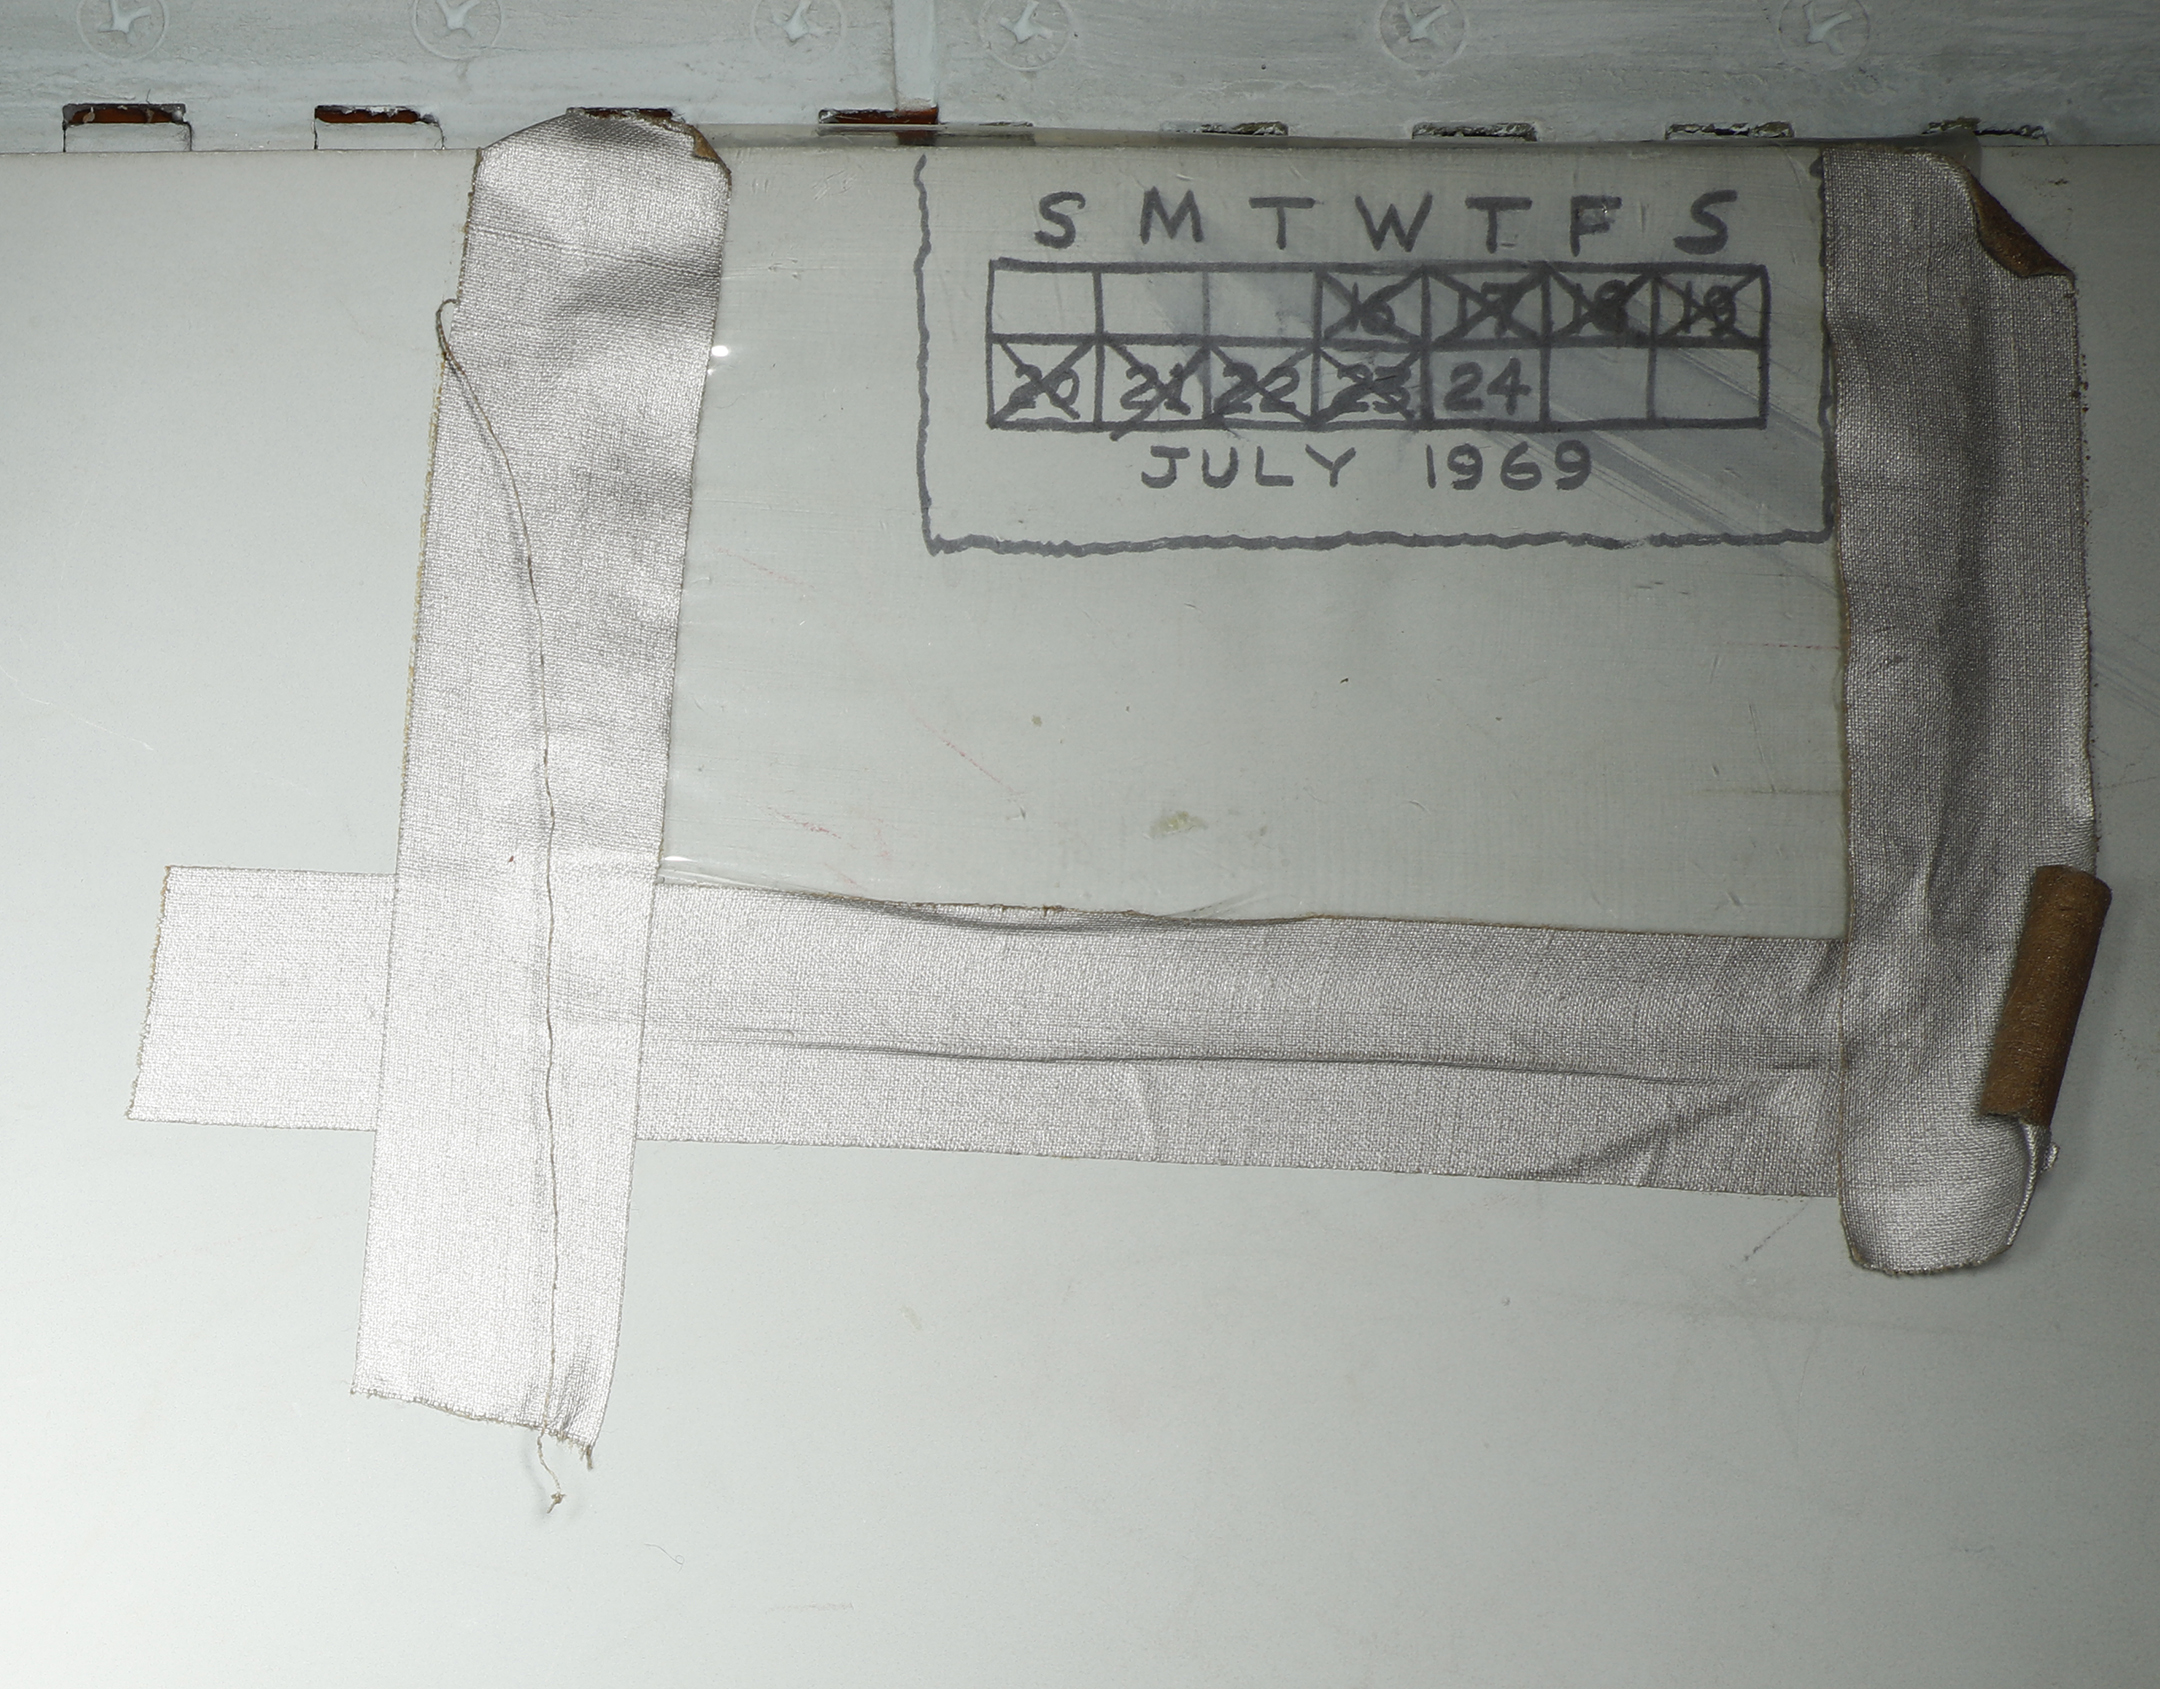 At some point during the mission, one of the astronauts created a small calendar on a smooth wall below one of the lockers. Each day of the Apollo 11 mission is crossed out except for landing day. The calendar is covered with a plastic sheet held by tape. Museum curators are in the process of trying to determine just when the calendar was drawn. Photo: Smithsonian Institution .